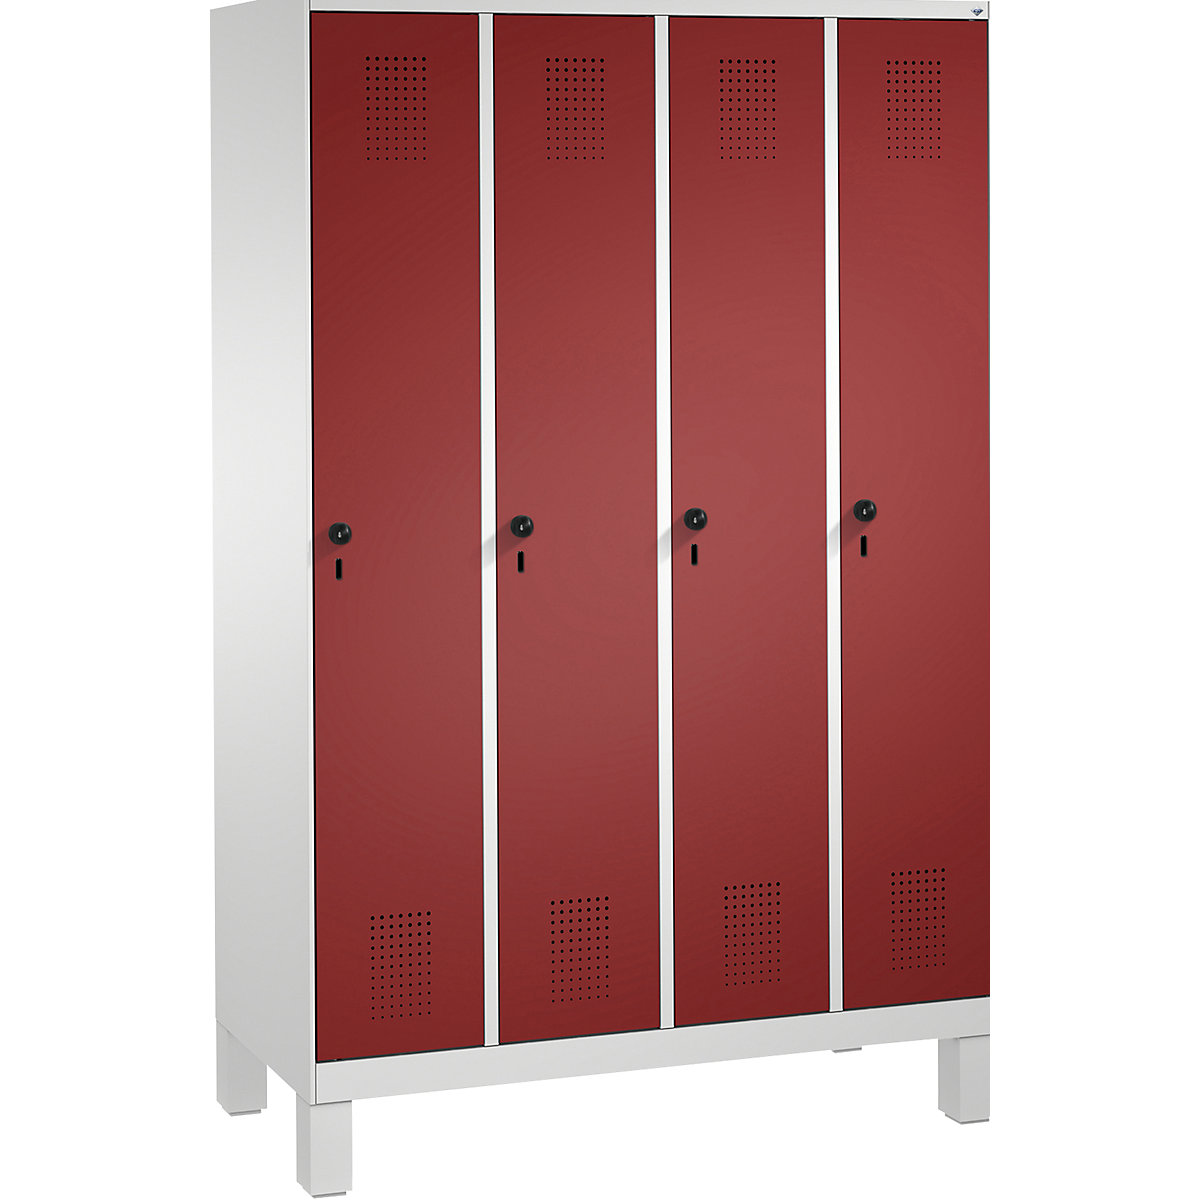 EVOLO cloakroom locker, with feet – C+P, 4 compartments, compartment width 300 mm, light grey / ruby red-9